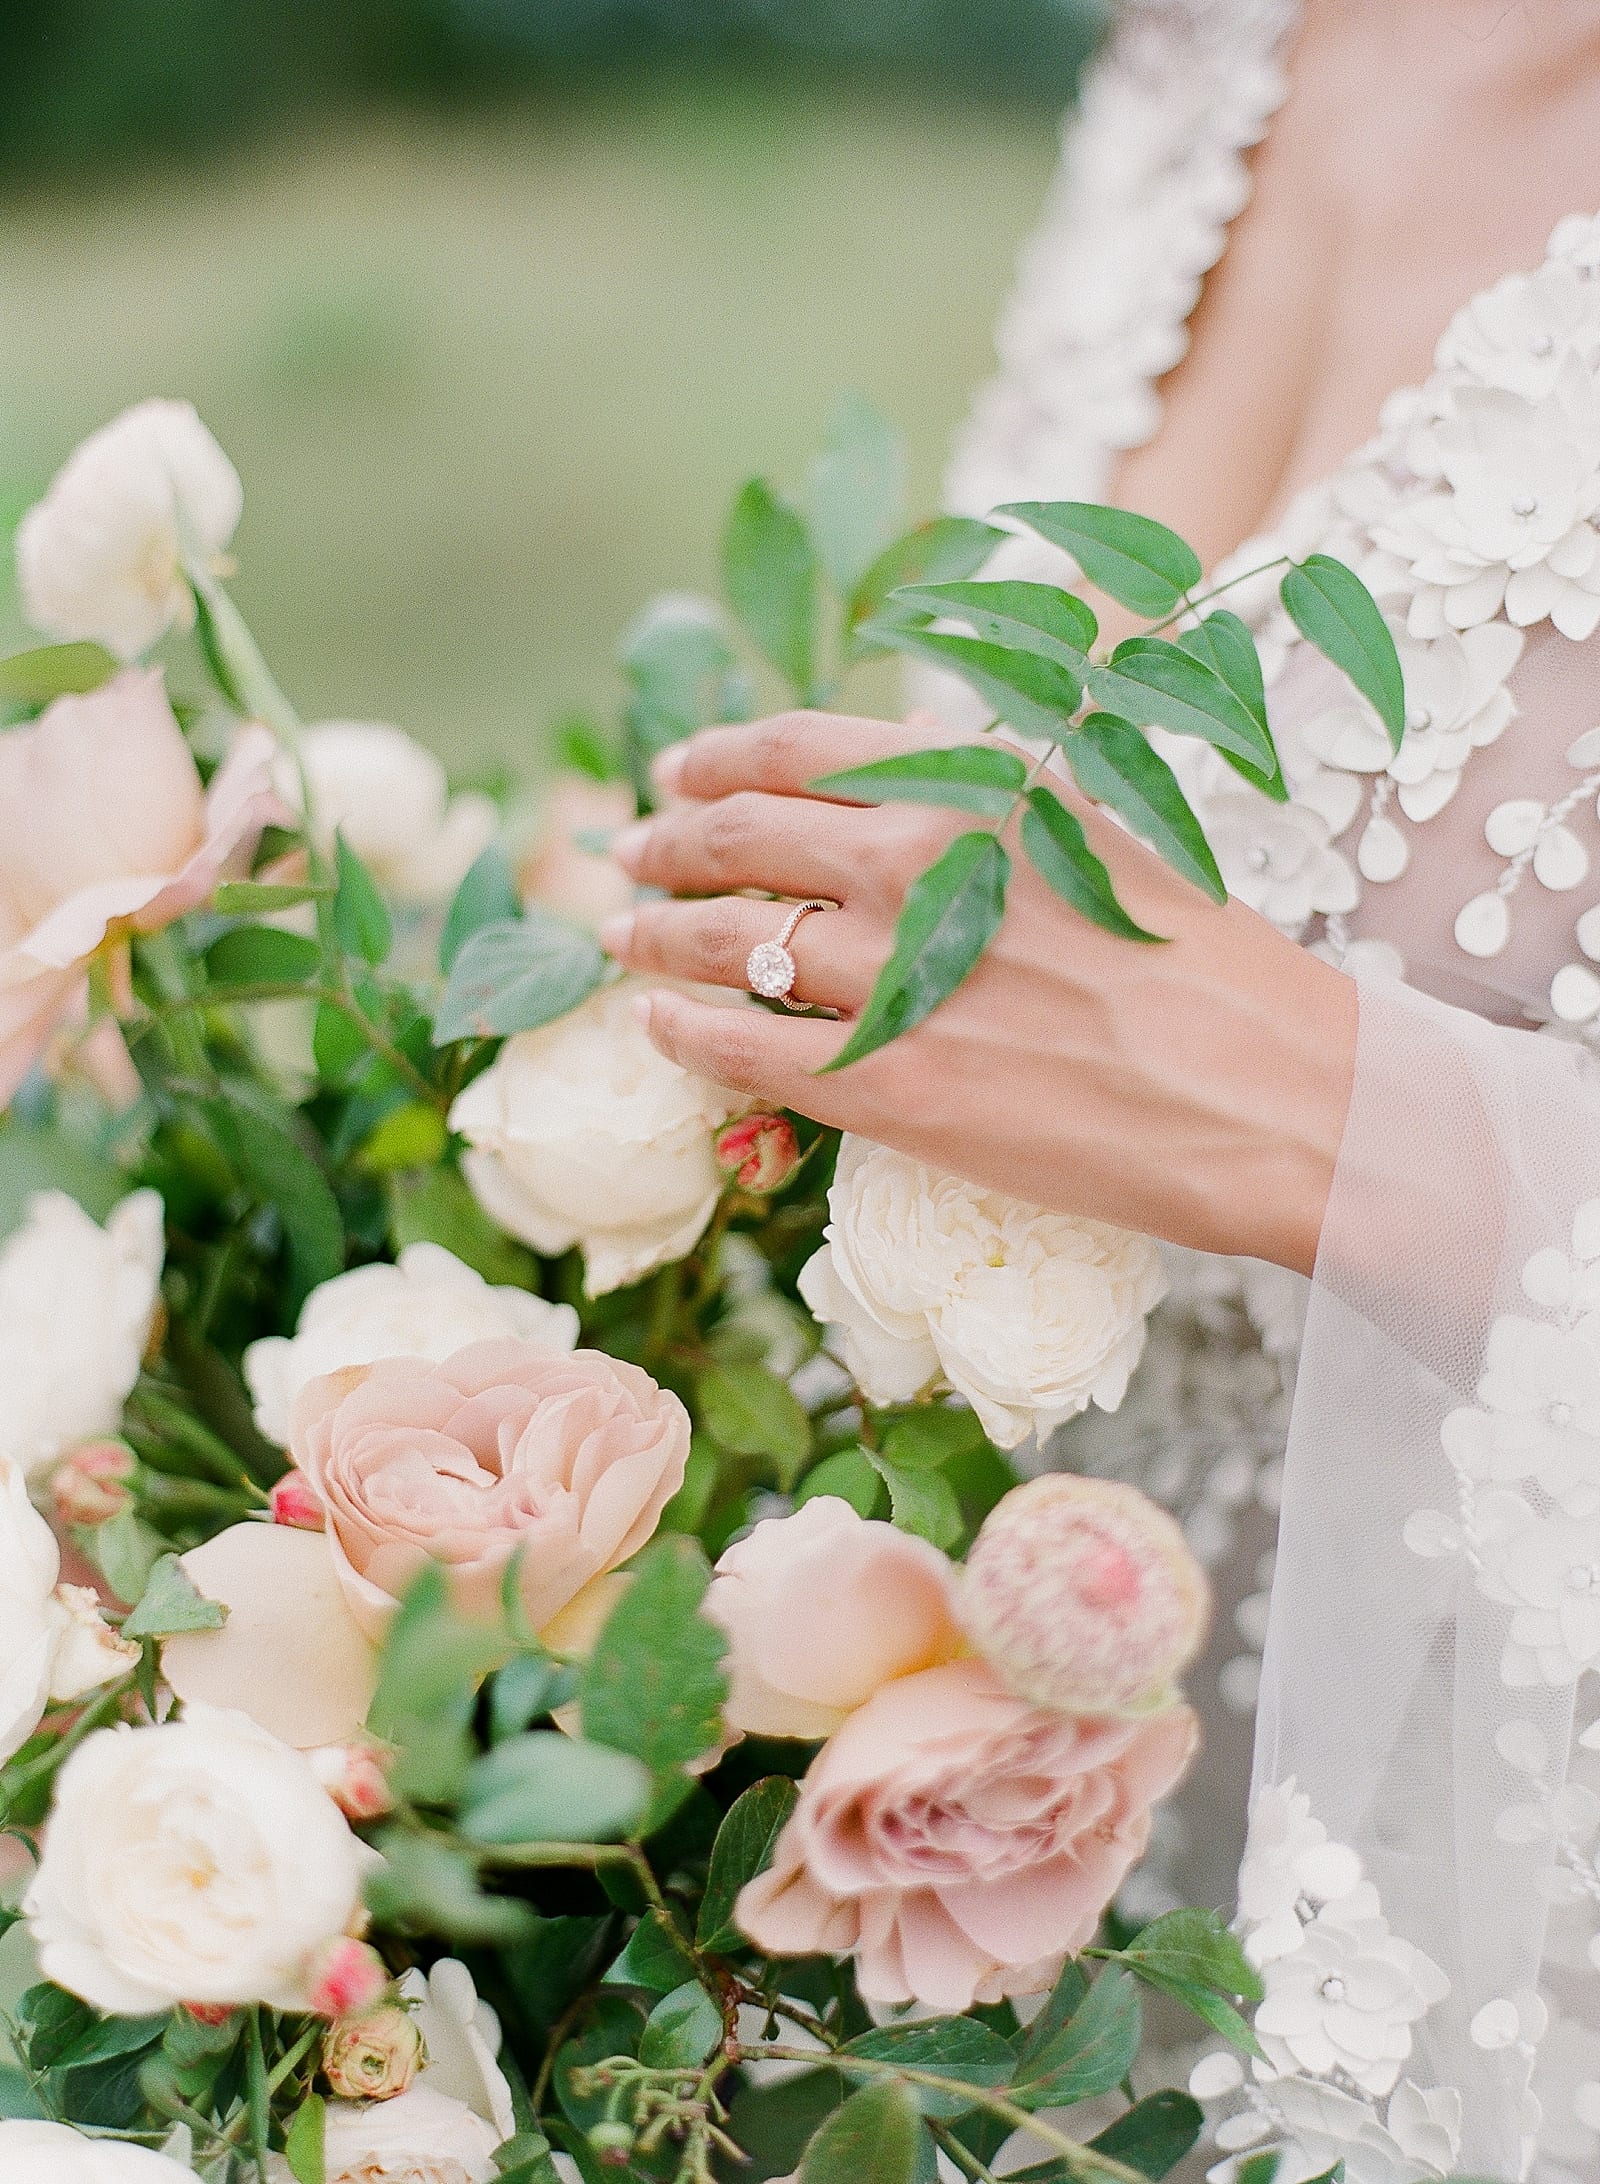 Brides Hand in Bridal Bouquet with Engagement Ring Photo